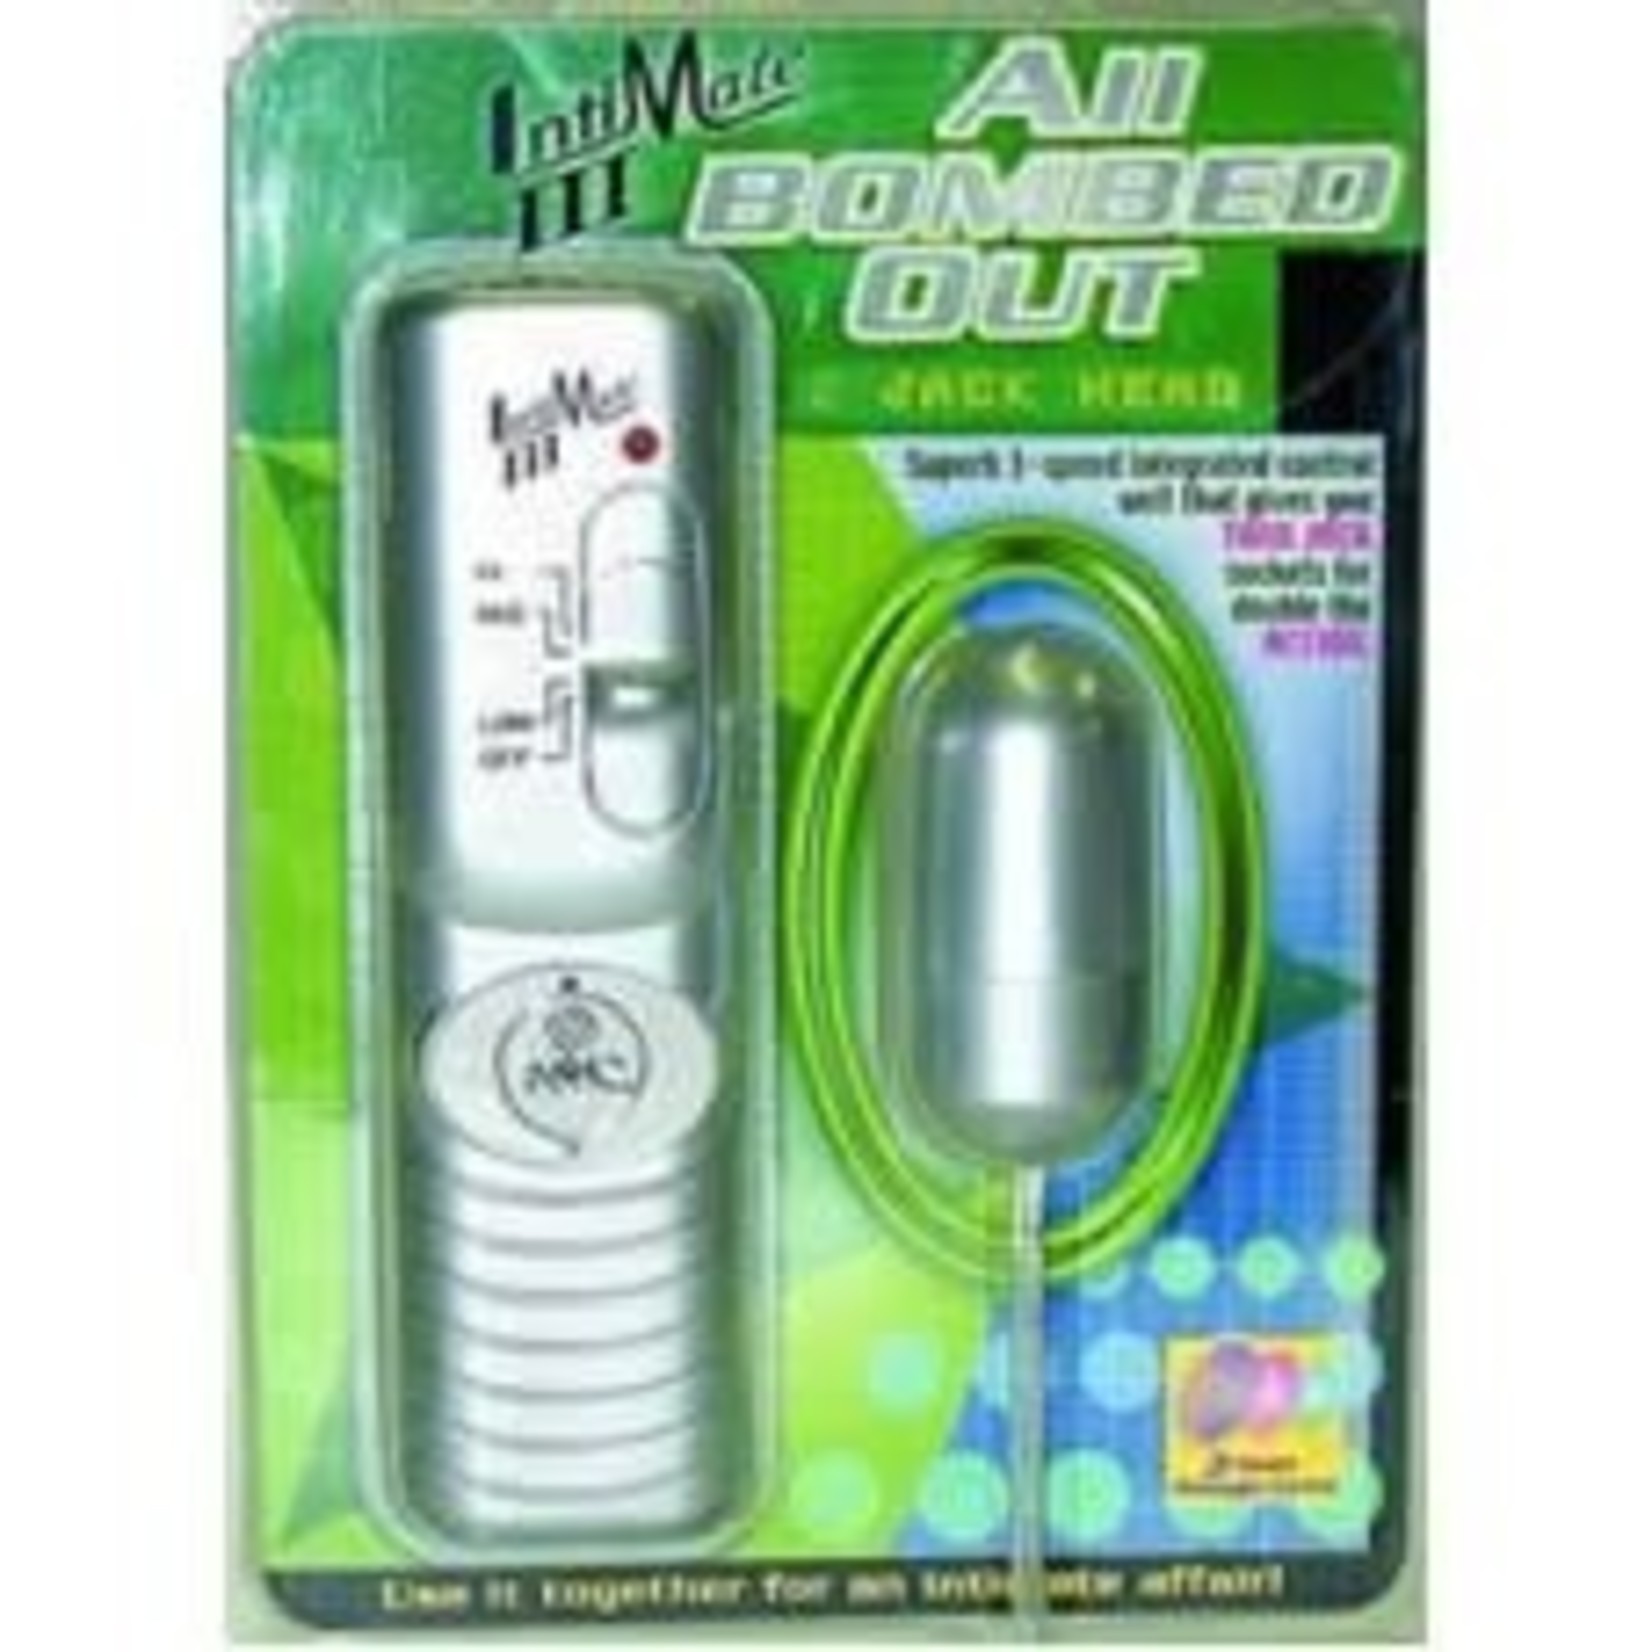 NMC ALL BOMBED OUT - BULLET VIBRATOR WITH REMOTE